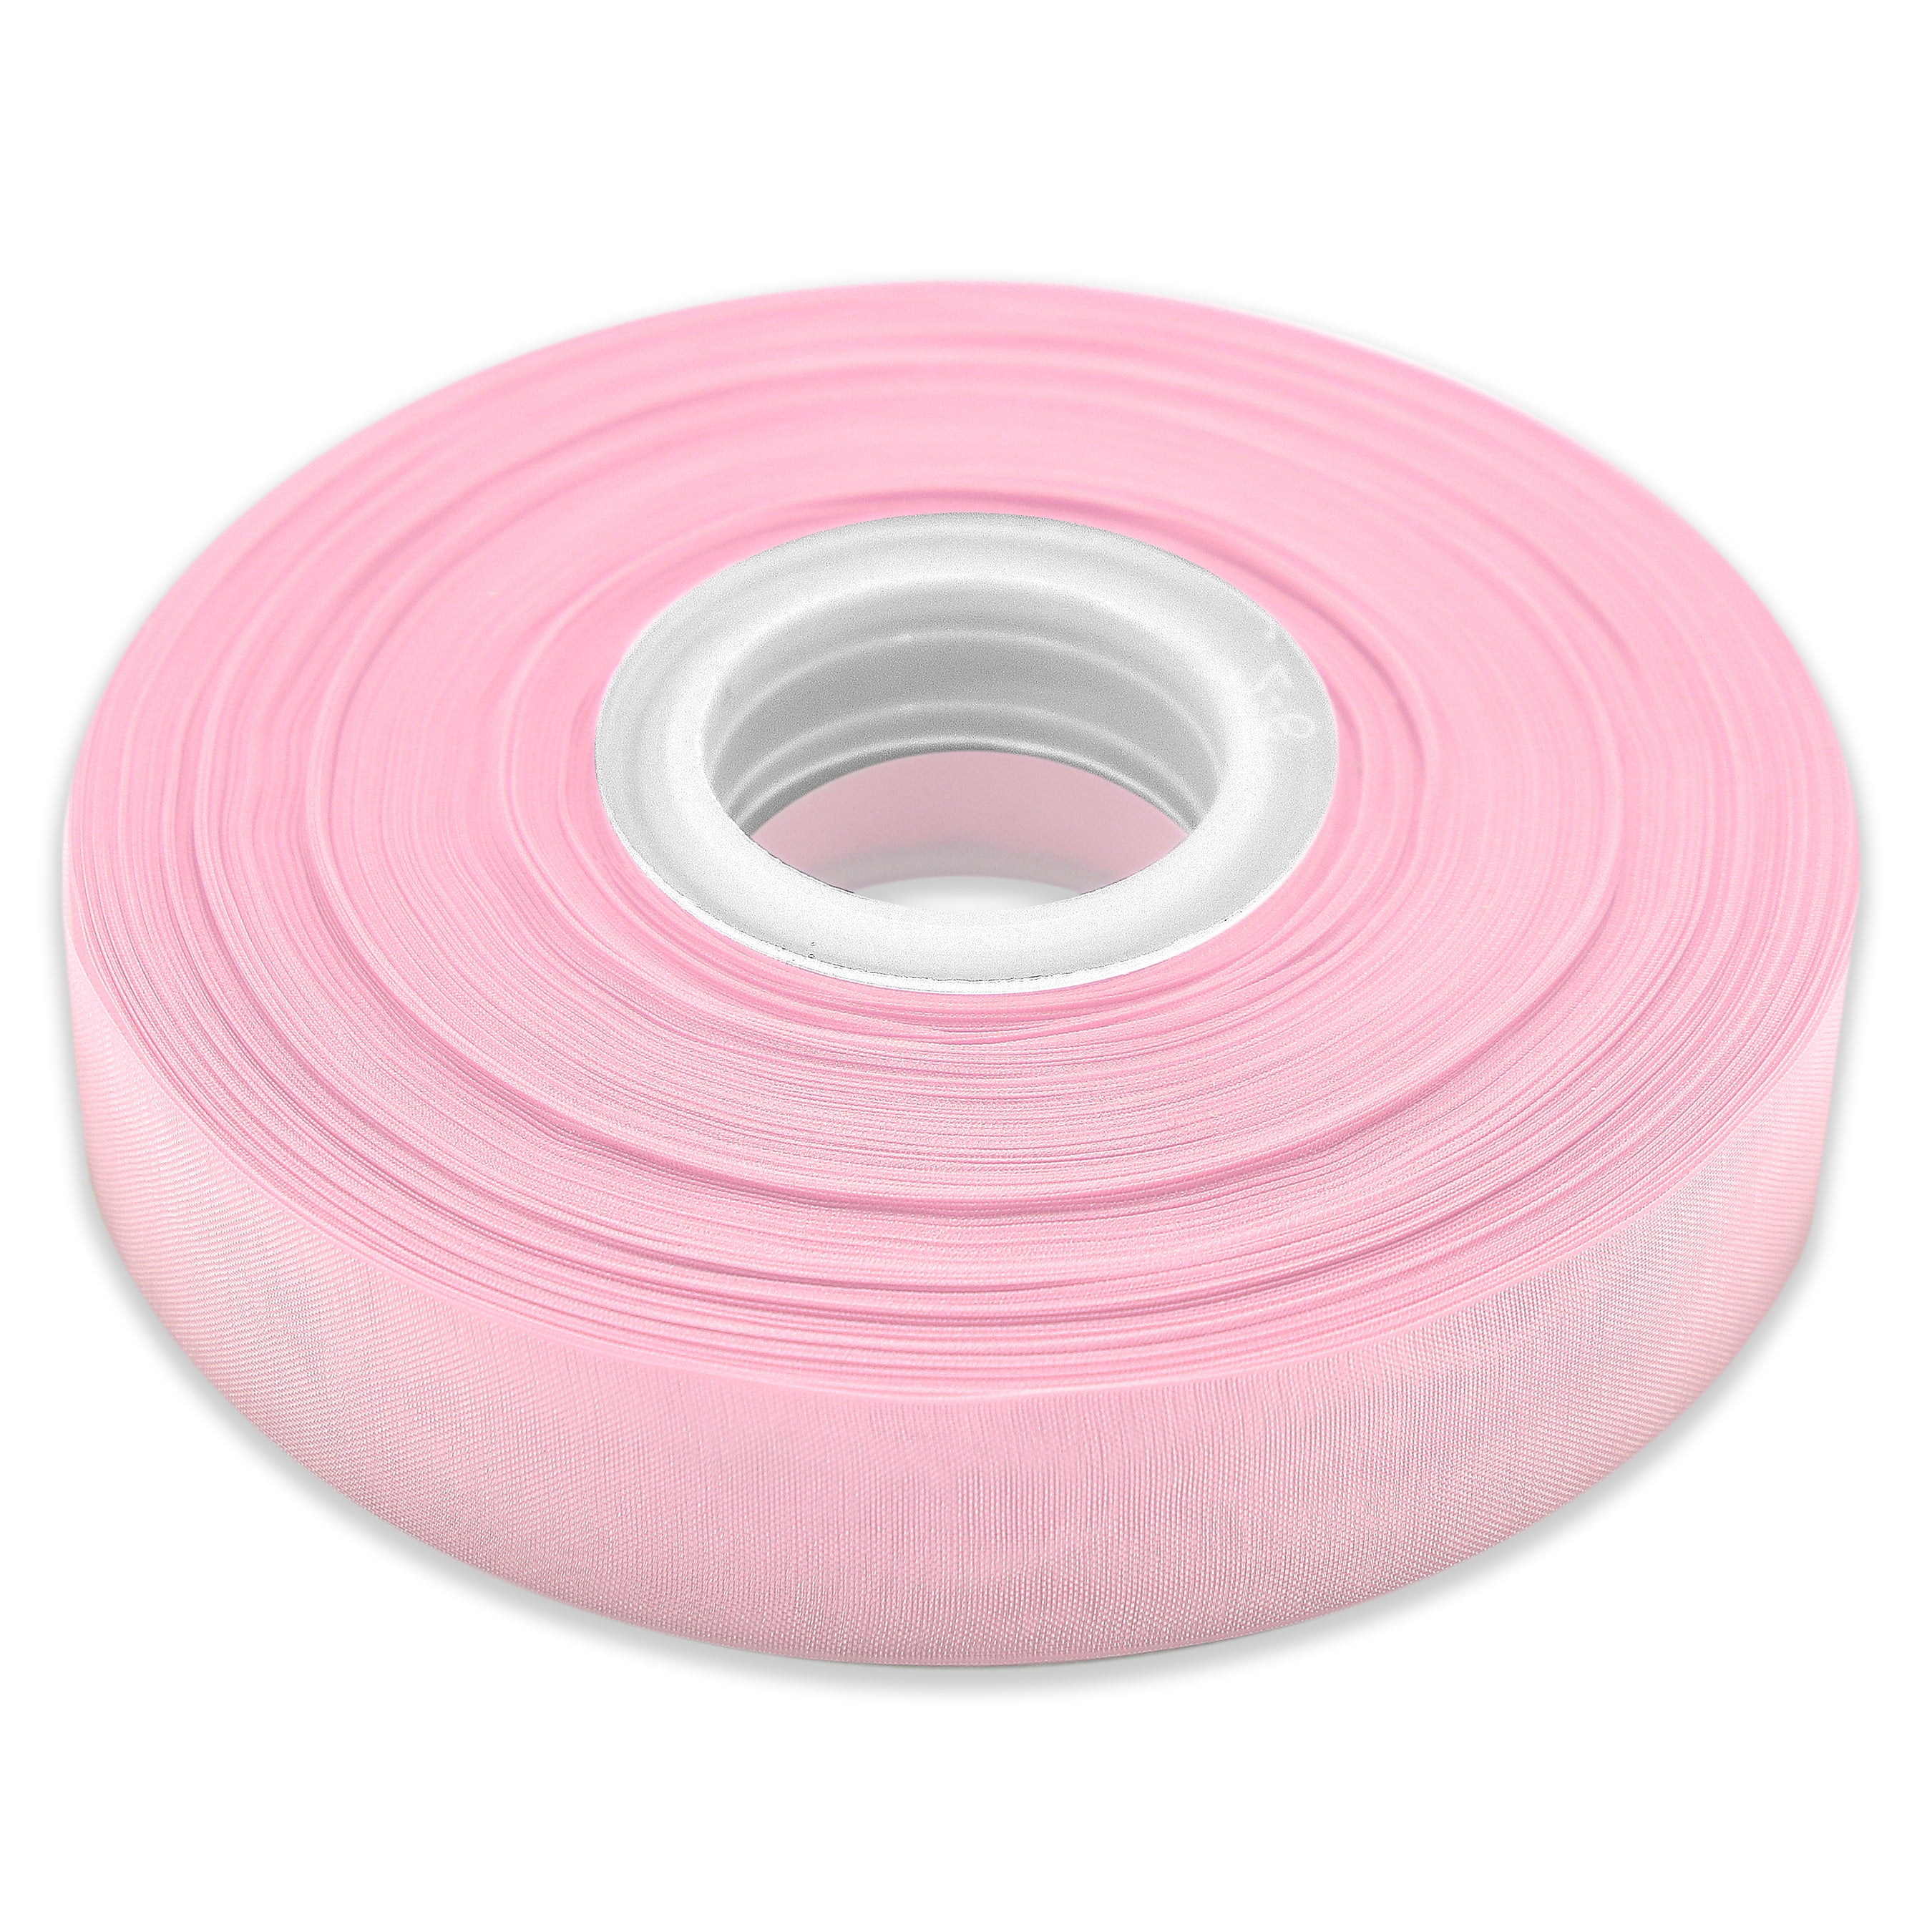 Light Pink Sheer Organza Ribbon With Satin Edges, 25mm 1in Wide